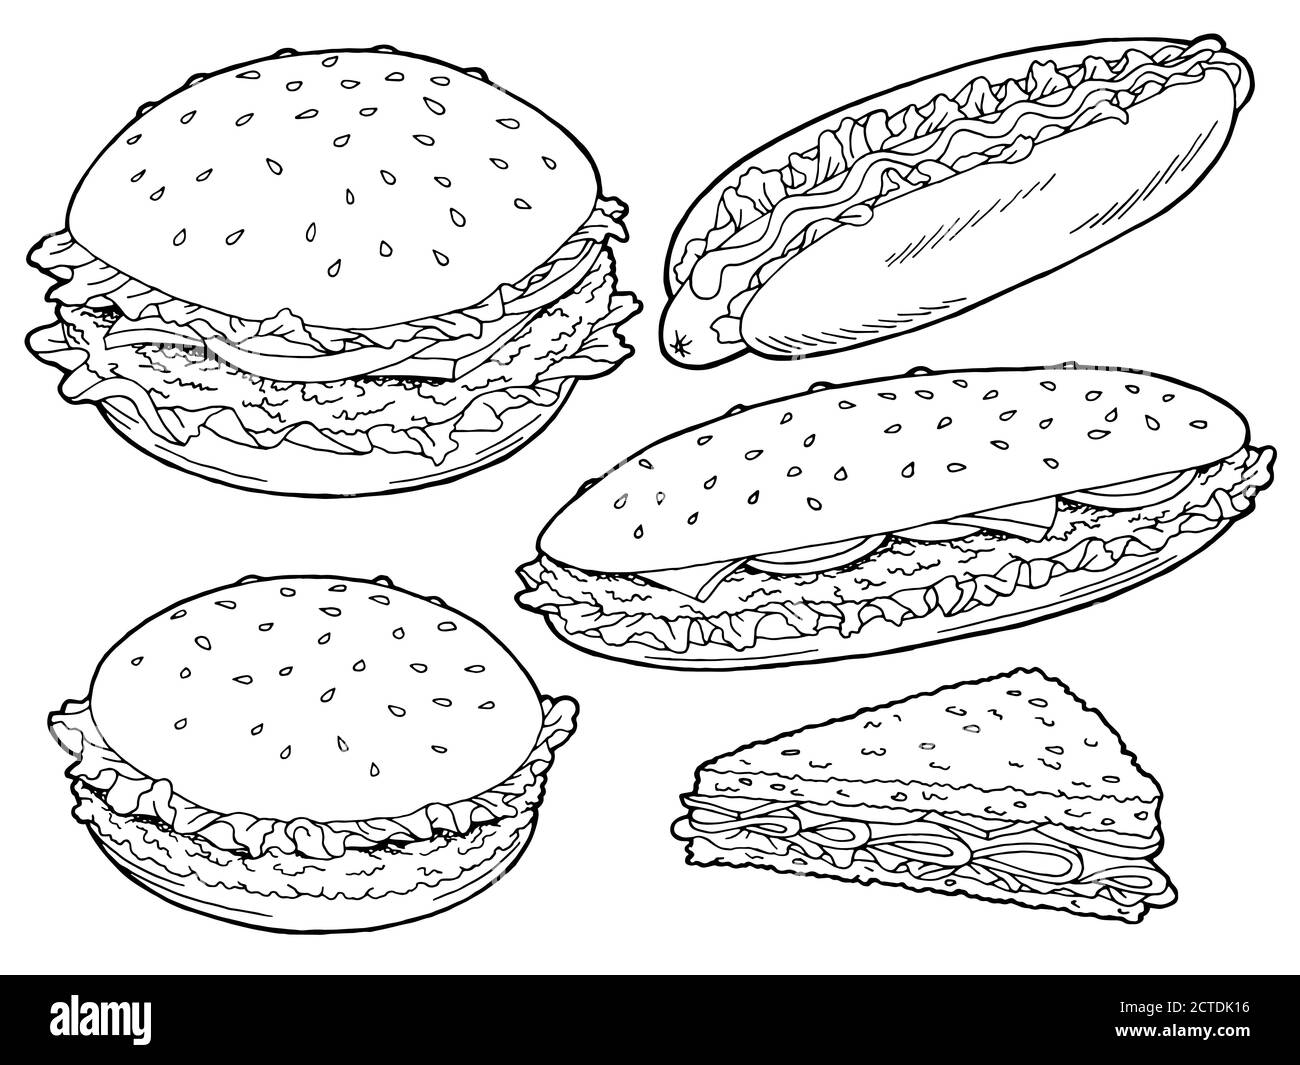 Hamburger graphic fast food black white sketch set isolated illustration vector Stock Vector